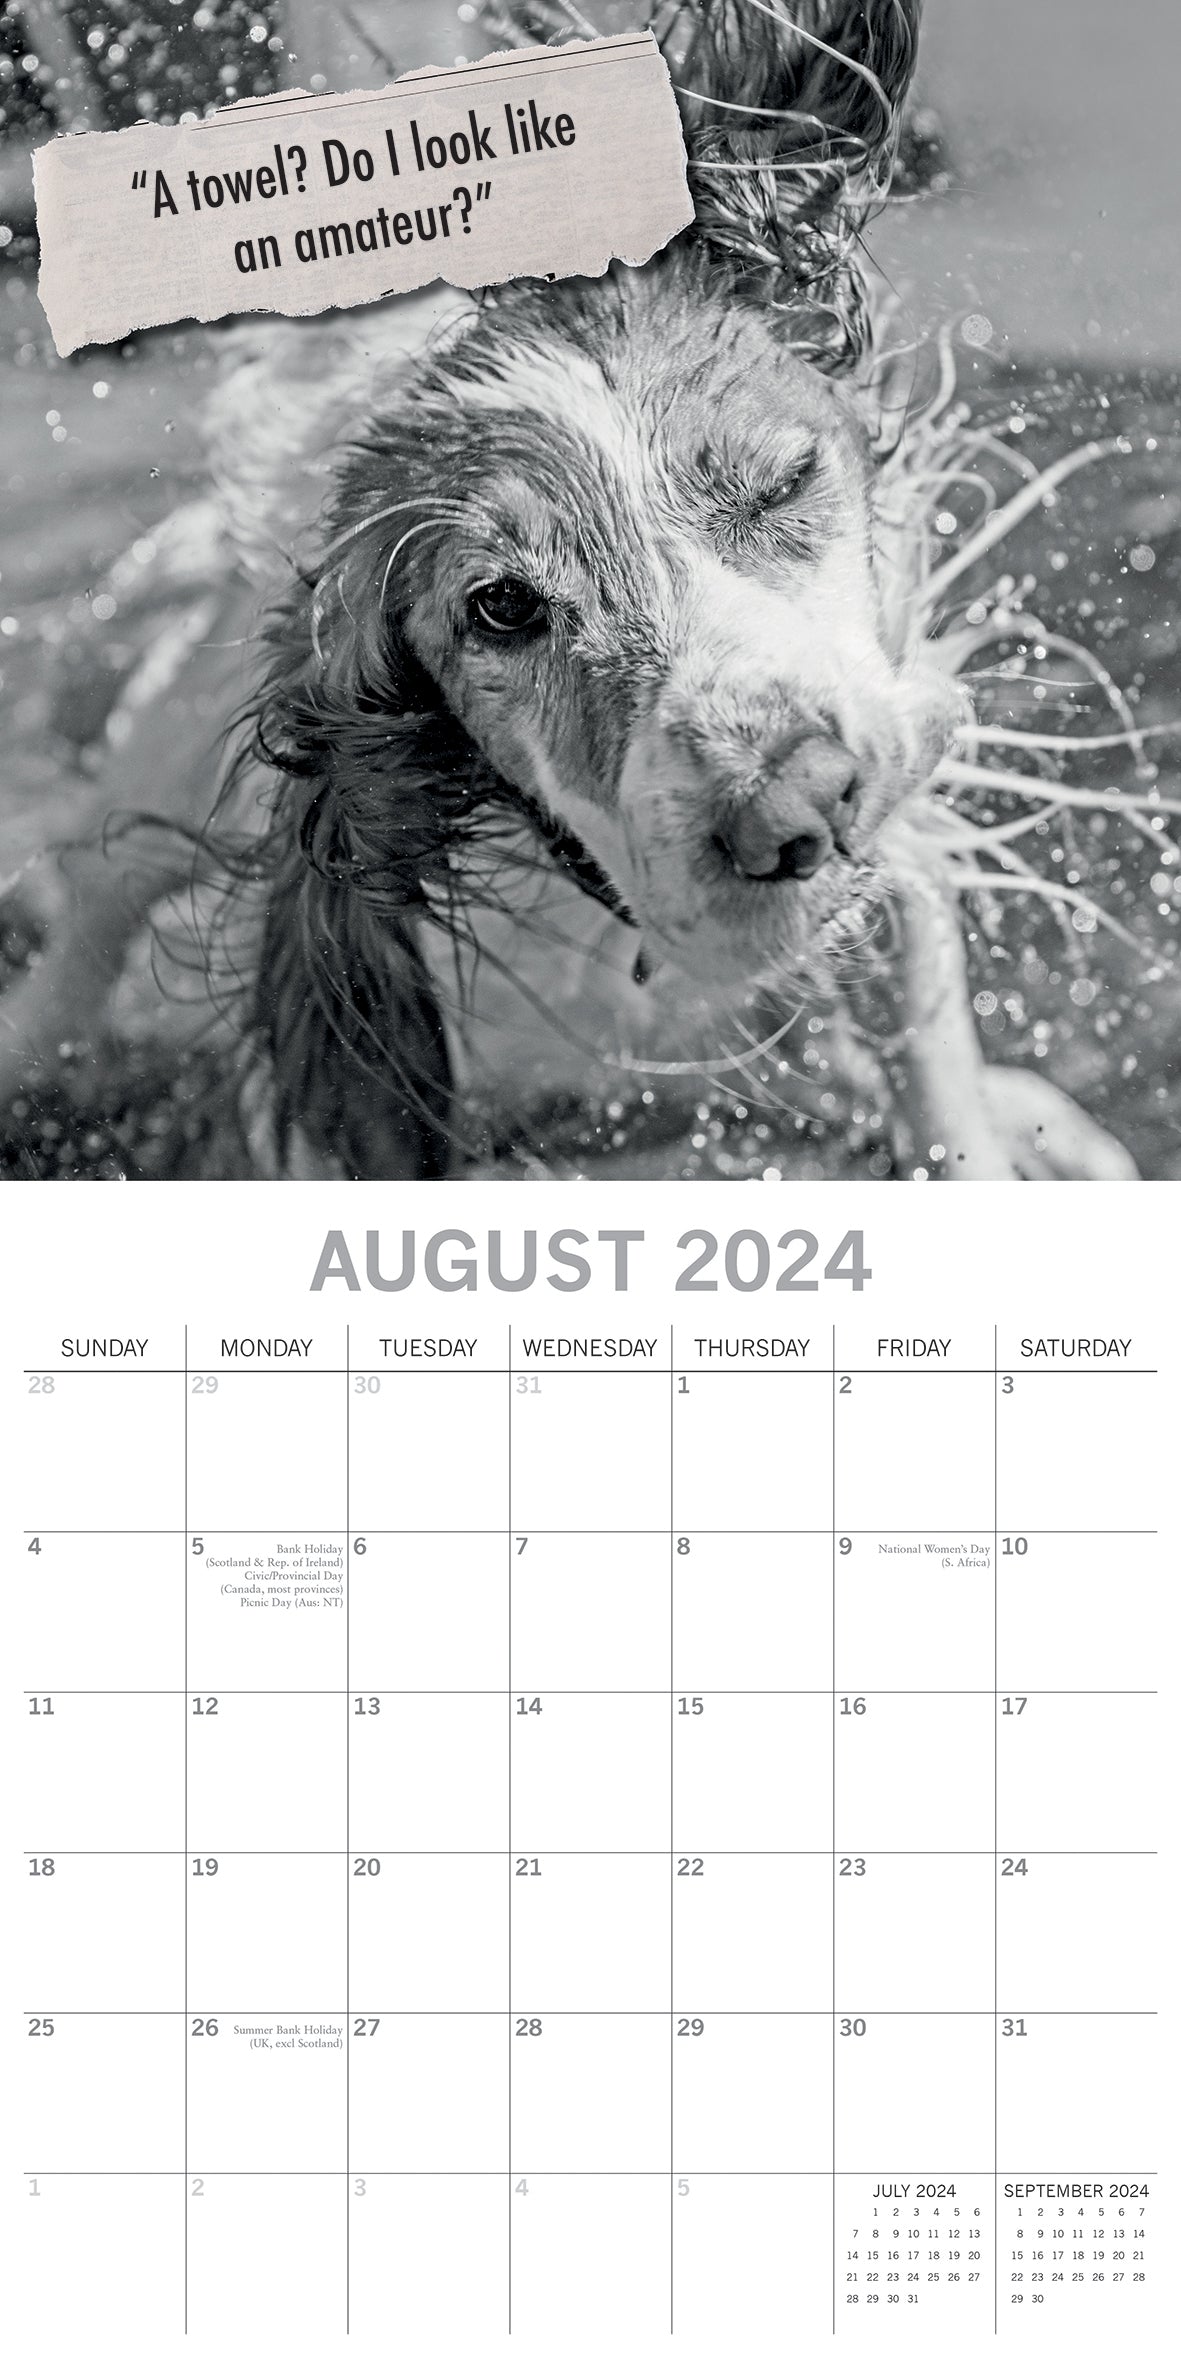 Mutts - 2024 Square Wall Calendar Pets Animals 16 Month Premium Planner New Year